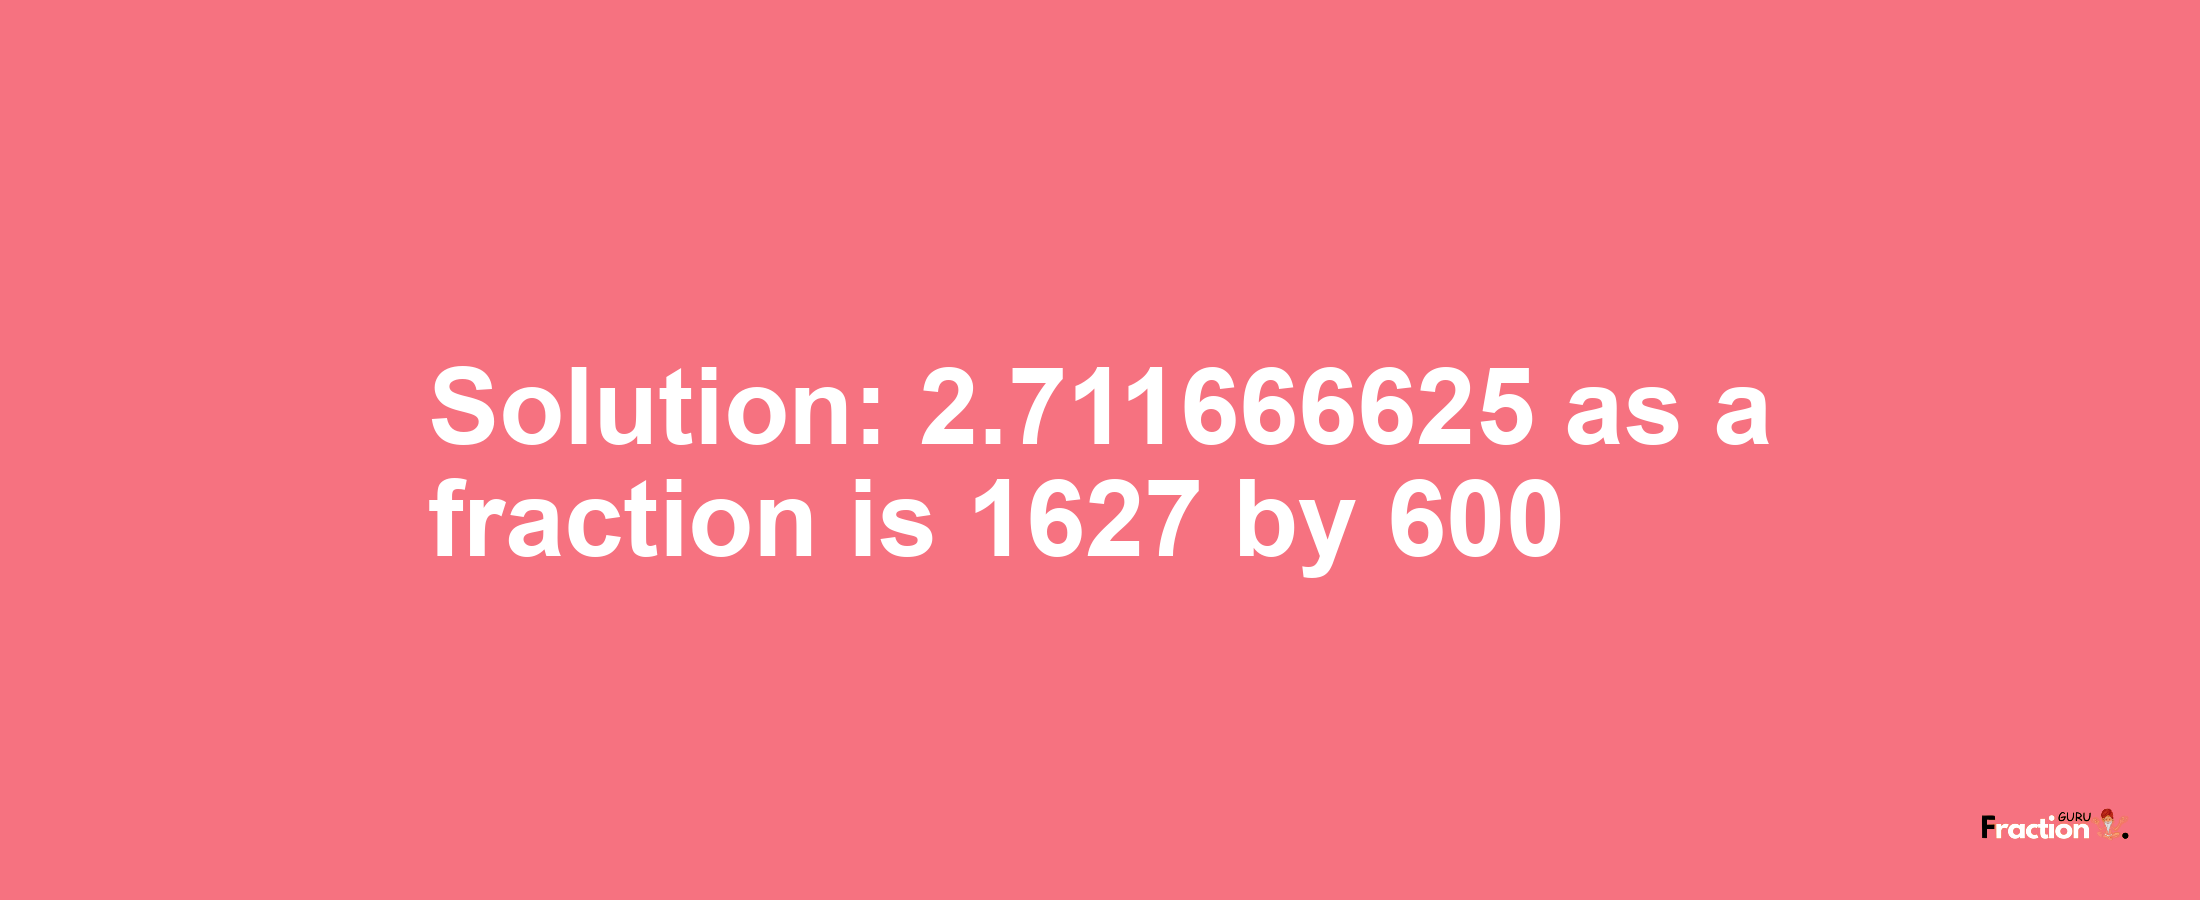 Solution:2.711666625 as a fraction is 1627/600